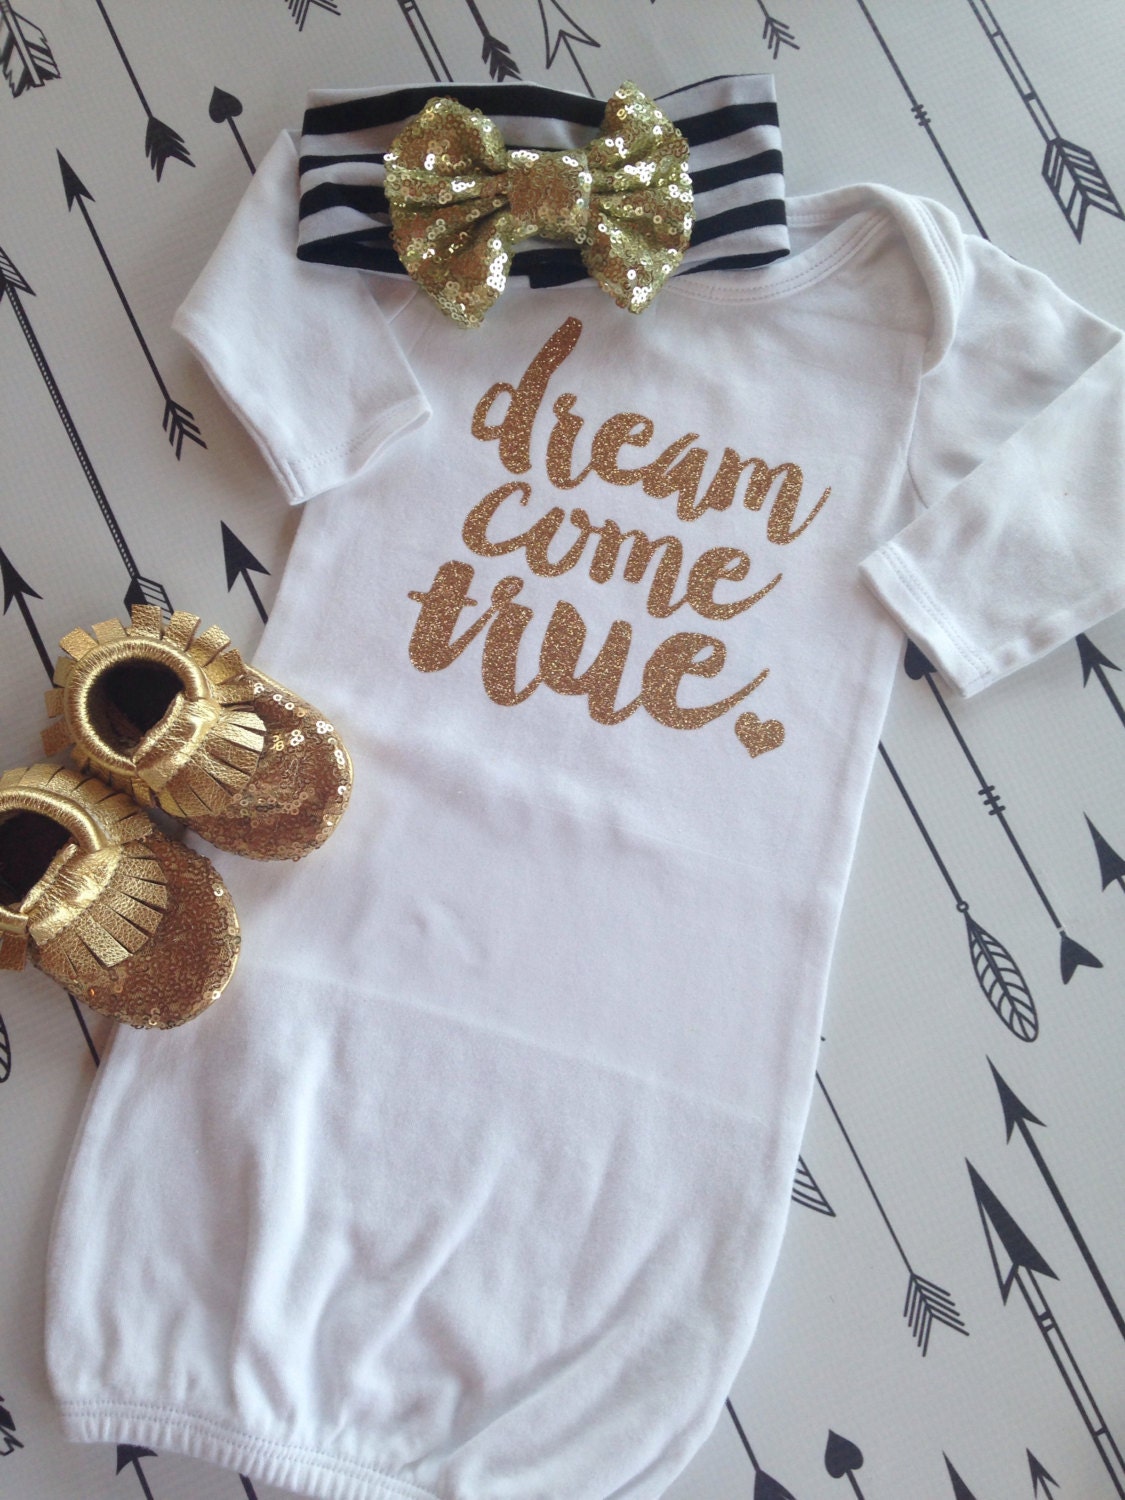 Dream come true baby gown infant bodysuit hospital outfit baby1125 x 1500